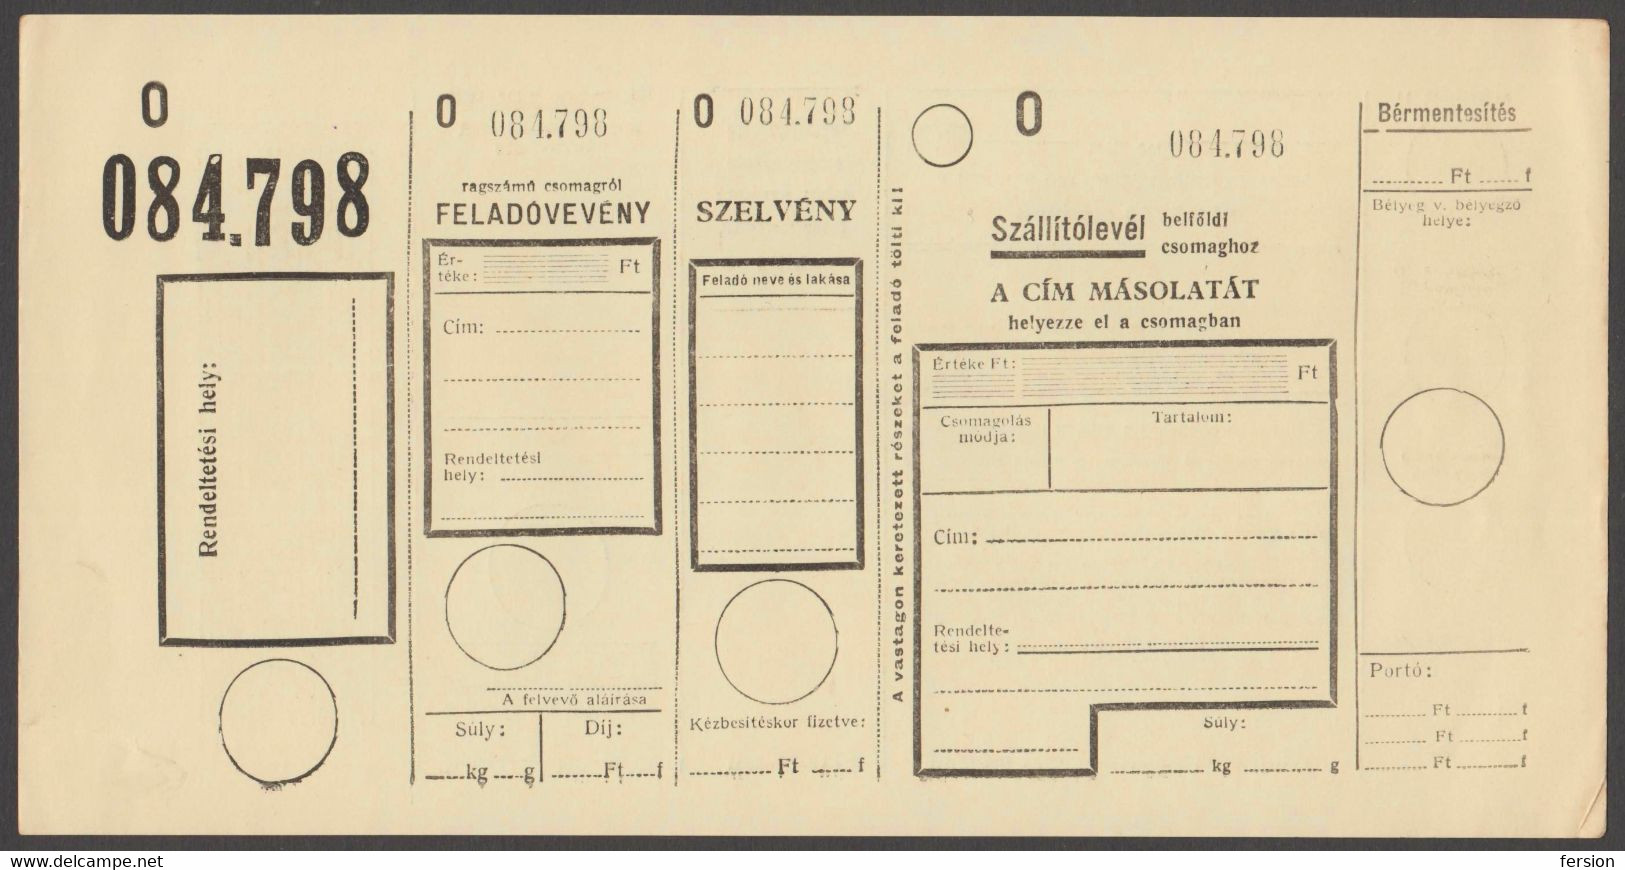 Post Office - POST OFFICE / "O" PACKET Inland / HUNGARY 1960's - Parcel Post Postal Stationery Form - Parcel Post